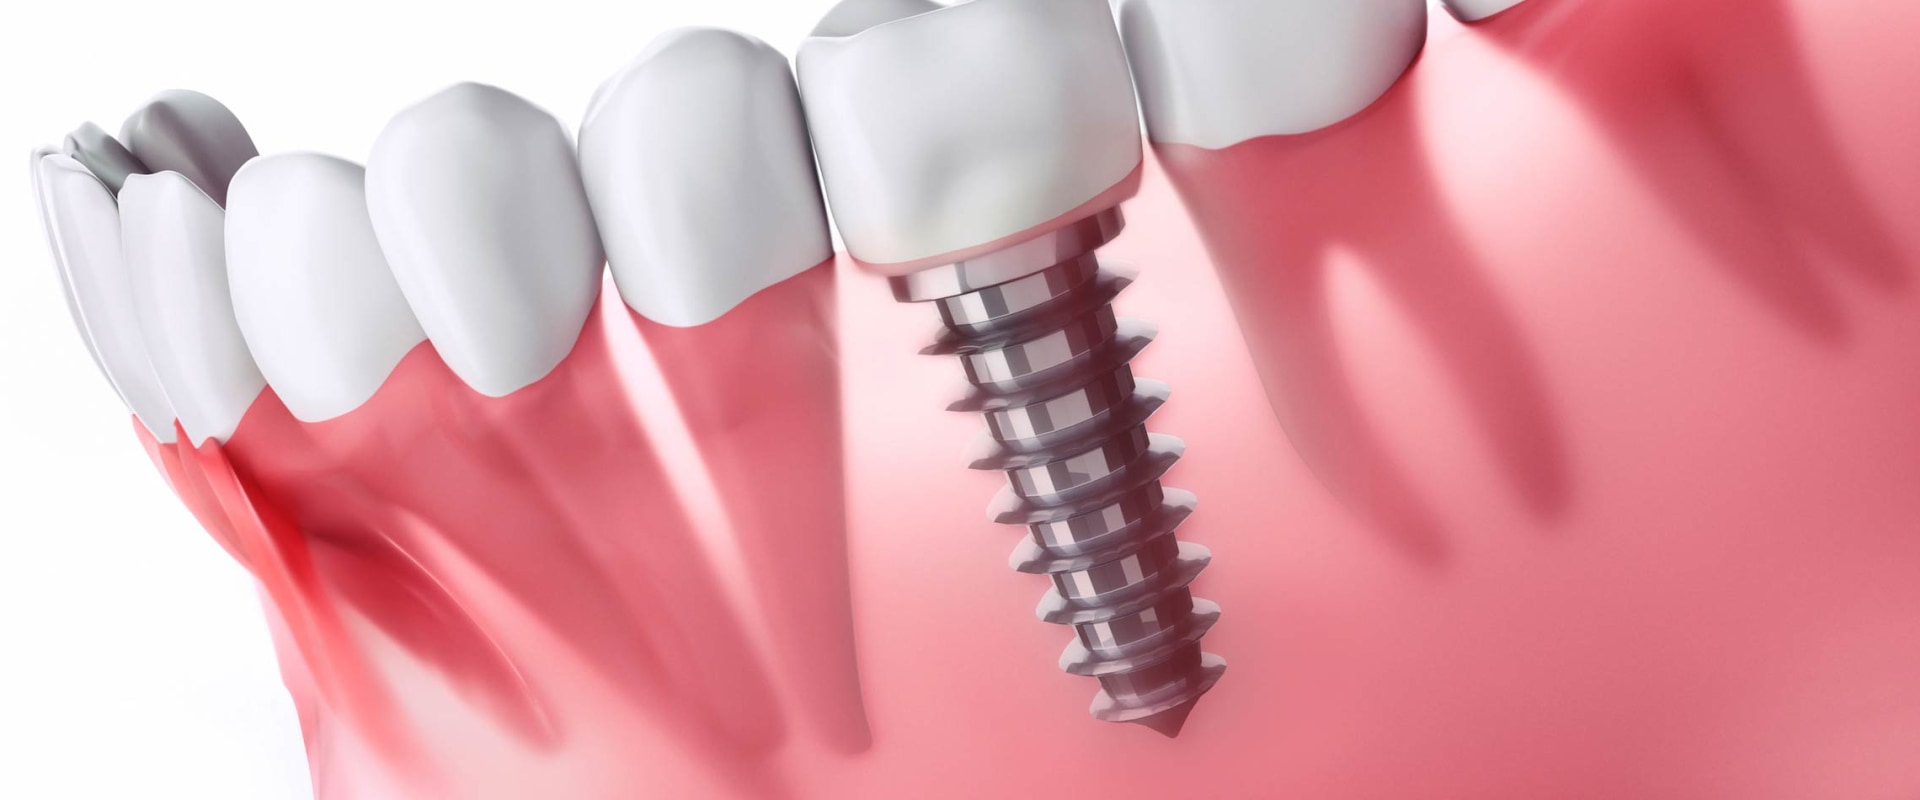 Can dental implants cause health issues?